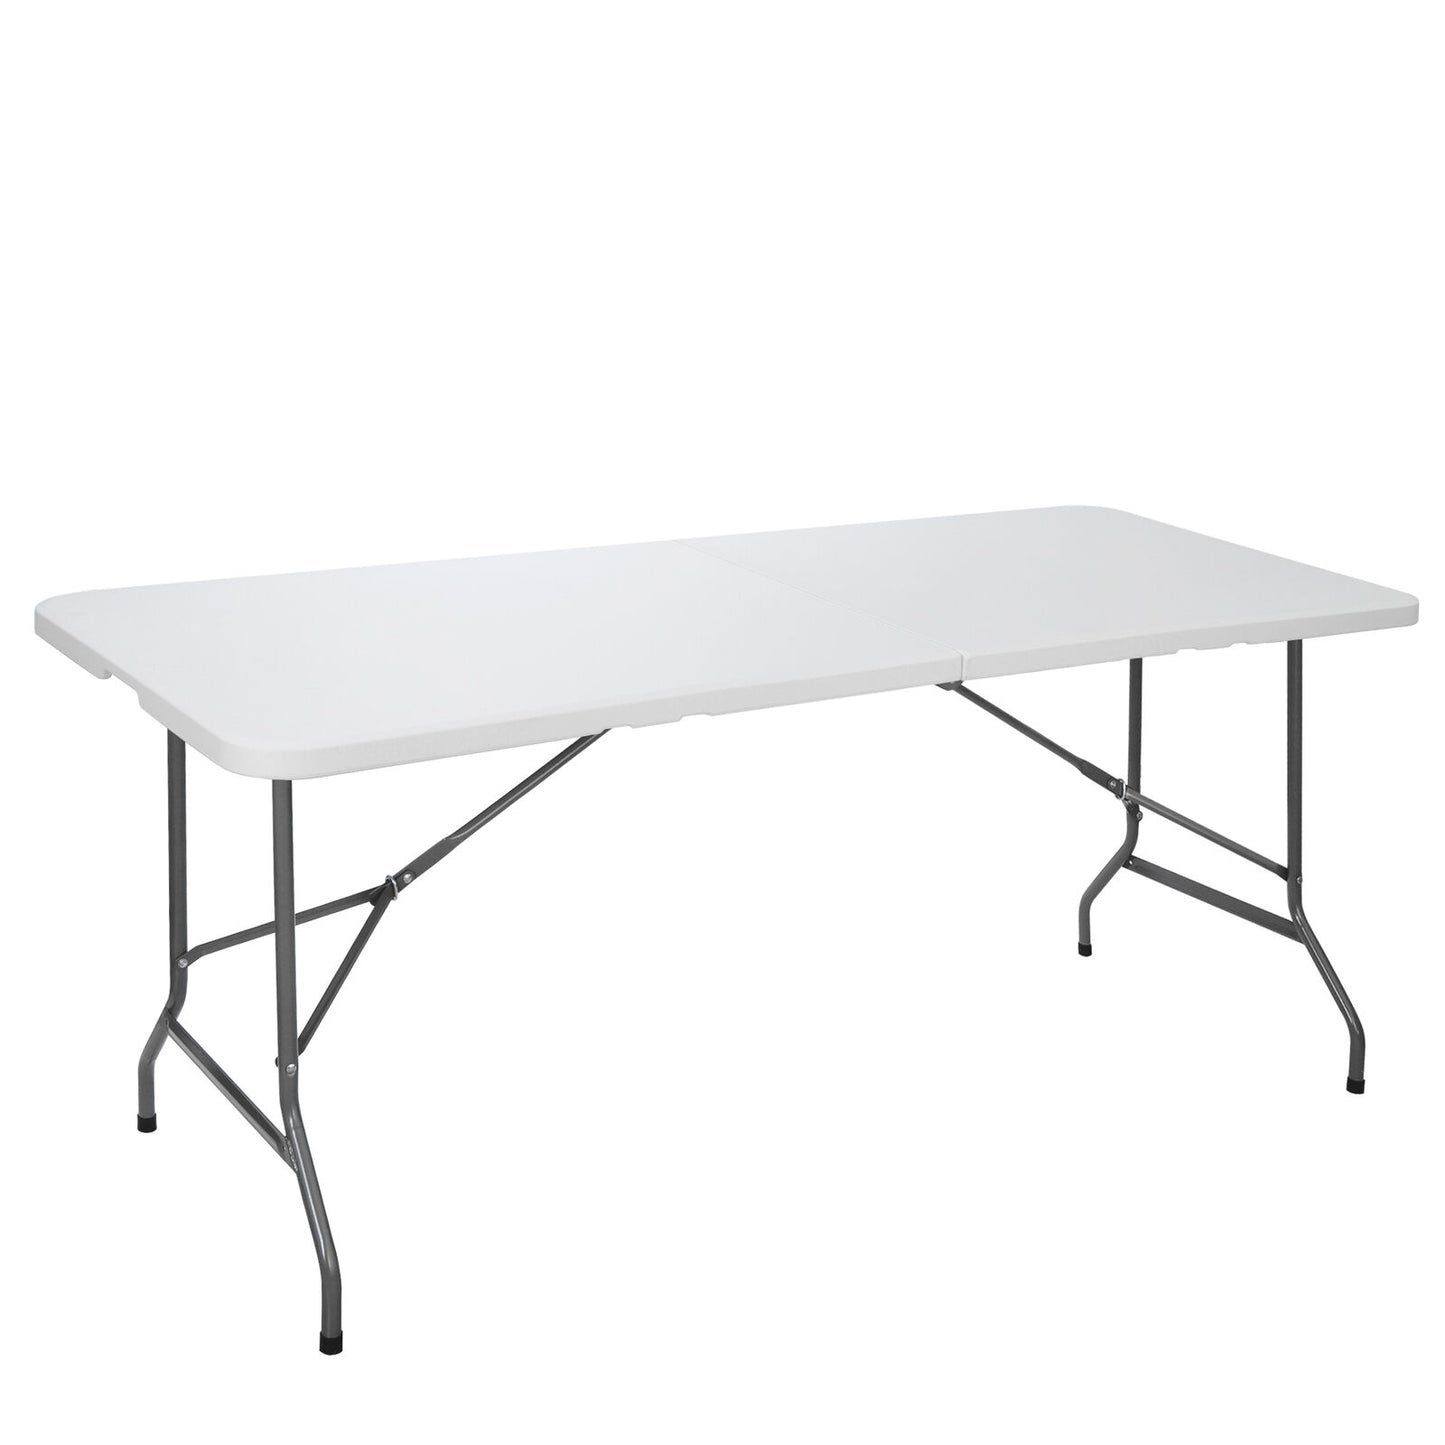 6ft Foldable Table Portable Indoor Picnic Party Camping Tables Easy to Carry